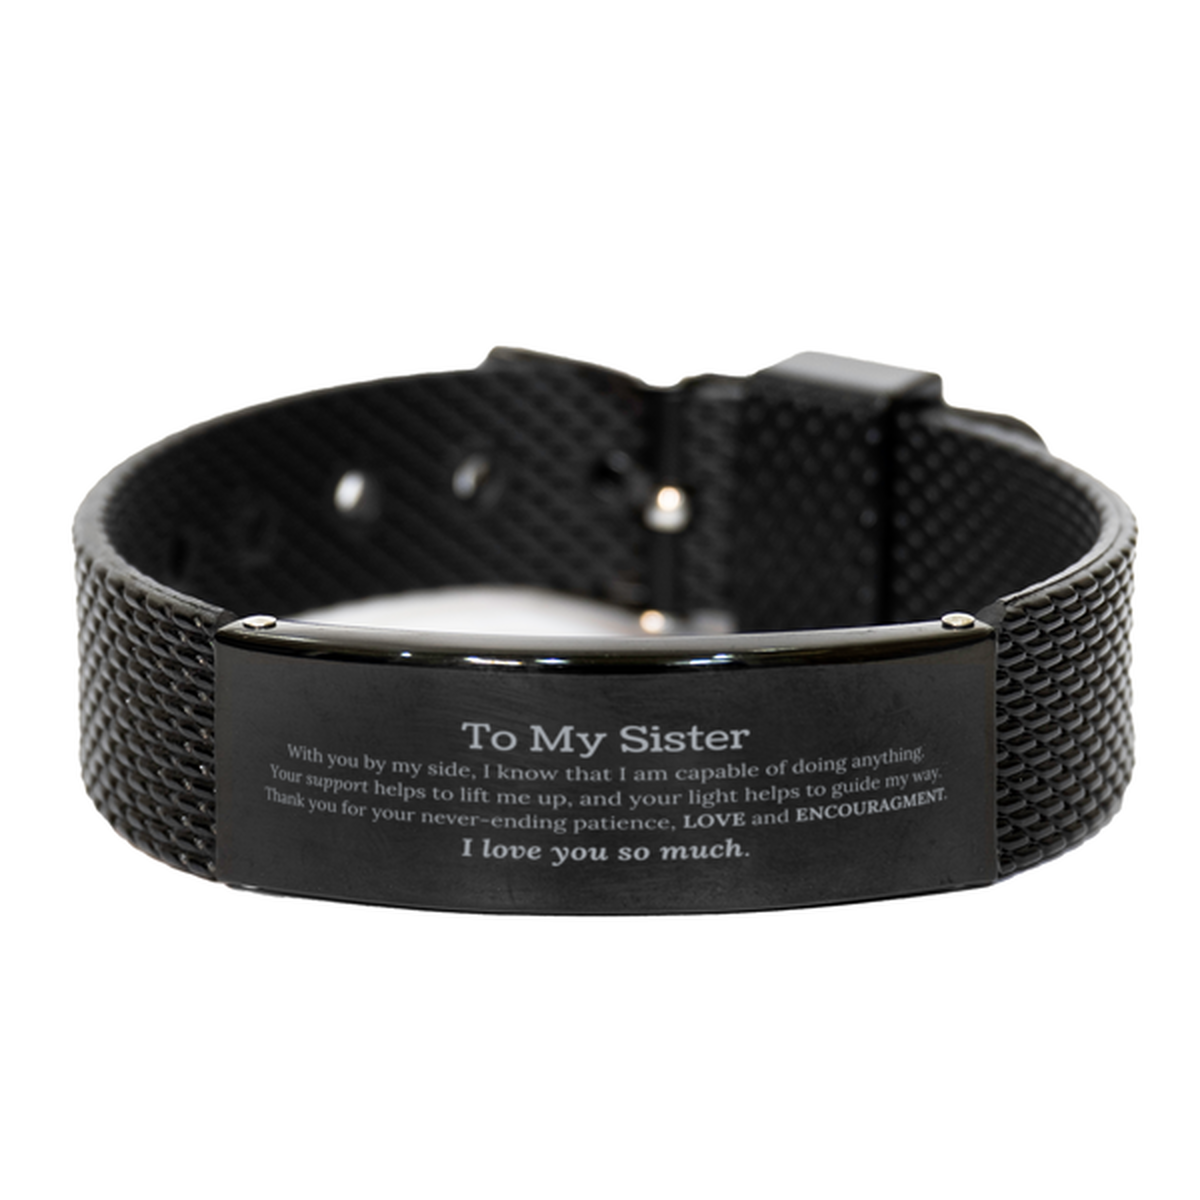 Appreciation Sister Black Shark Mesh Bracelet Gifts, To My Sister Birthday Christmas Wedding Keepsake Gifts for Sister With you by my side, I know that I am capable of doing anything. I love you so much